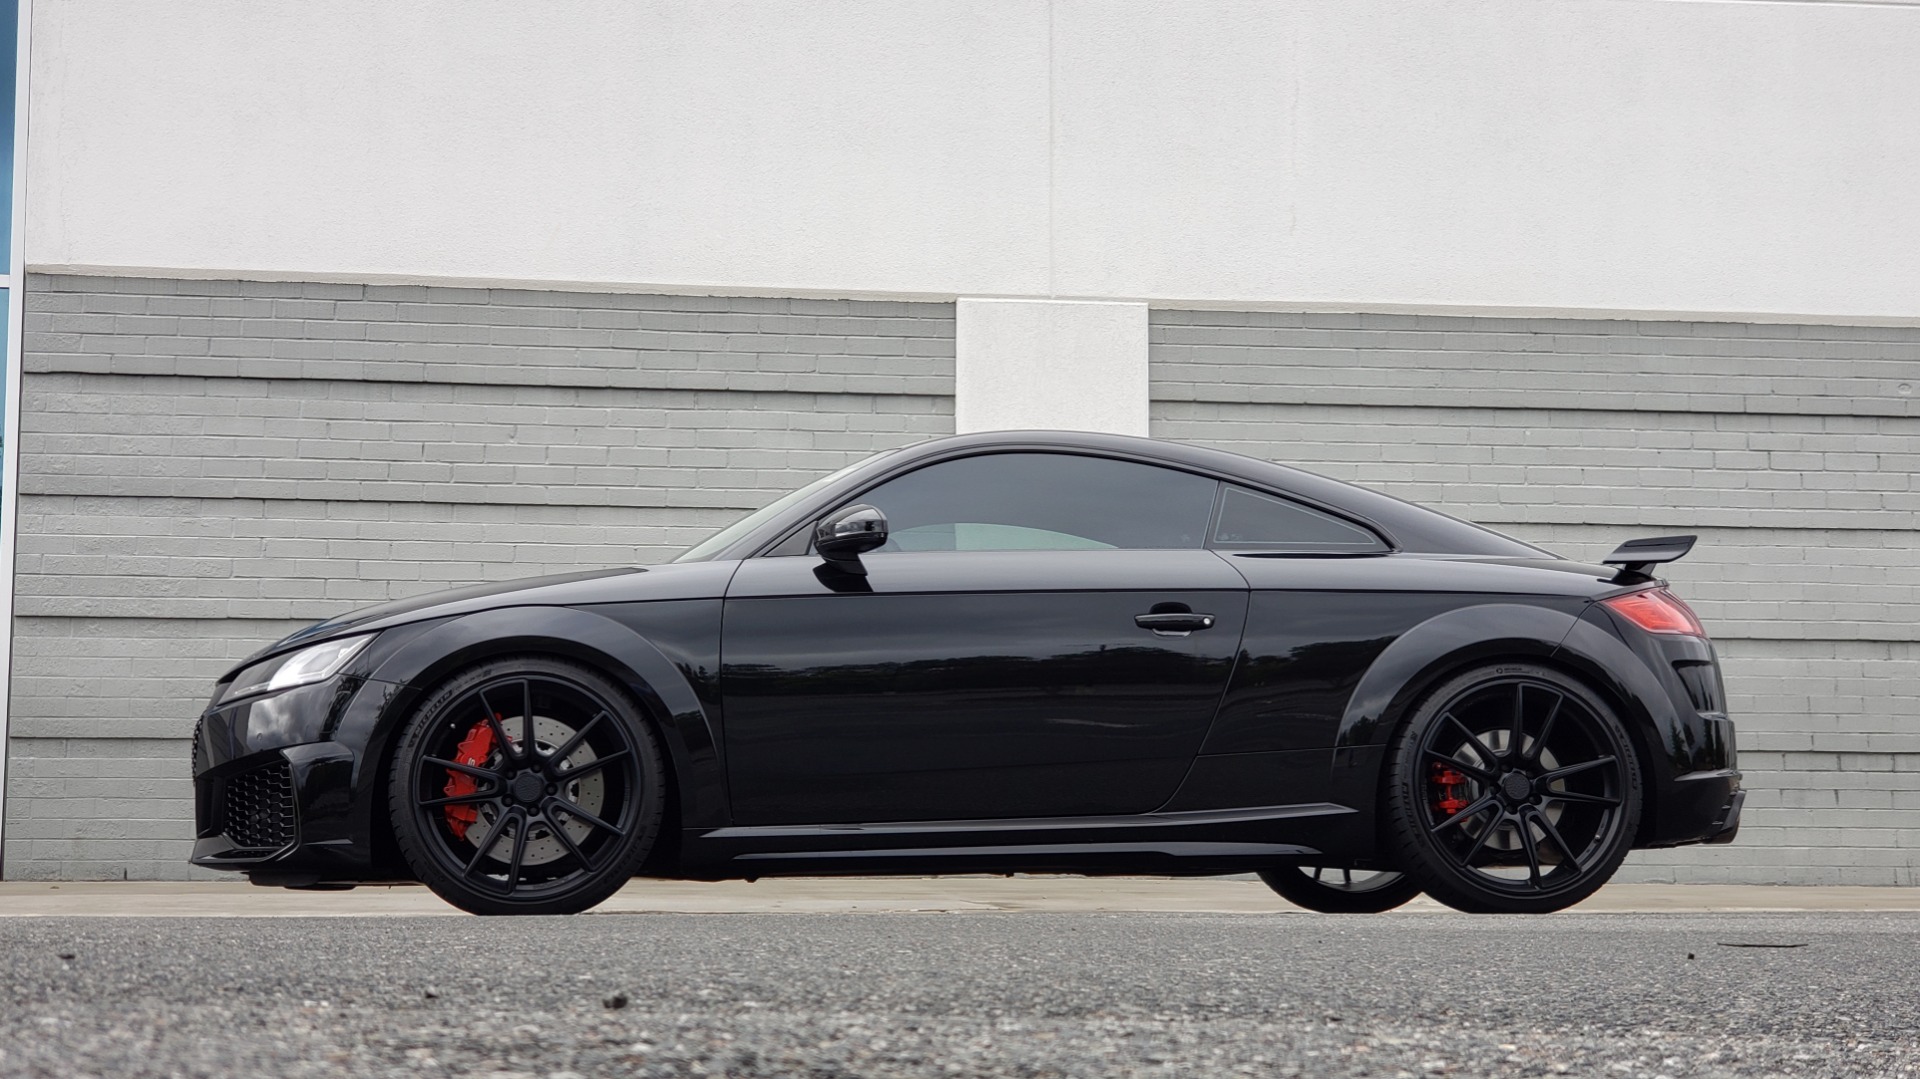 Used 2019 Audi TT RS 2.5L / QUATTRO / RS DESIGN / TECH / DYNAMIC / BLACK OPTIC / CARB for sale Sold at Formula Imports in Charlotte NC 28227 6